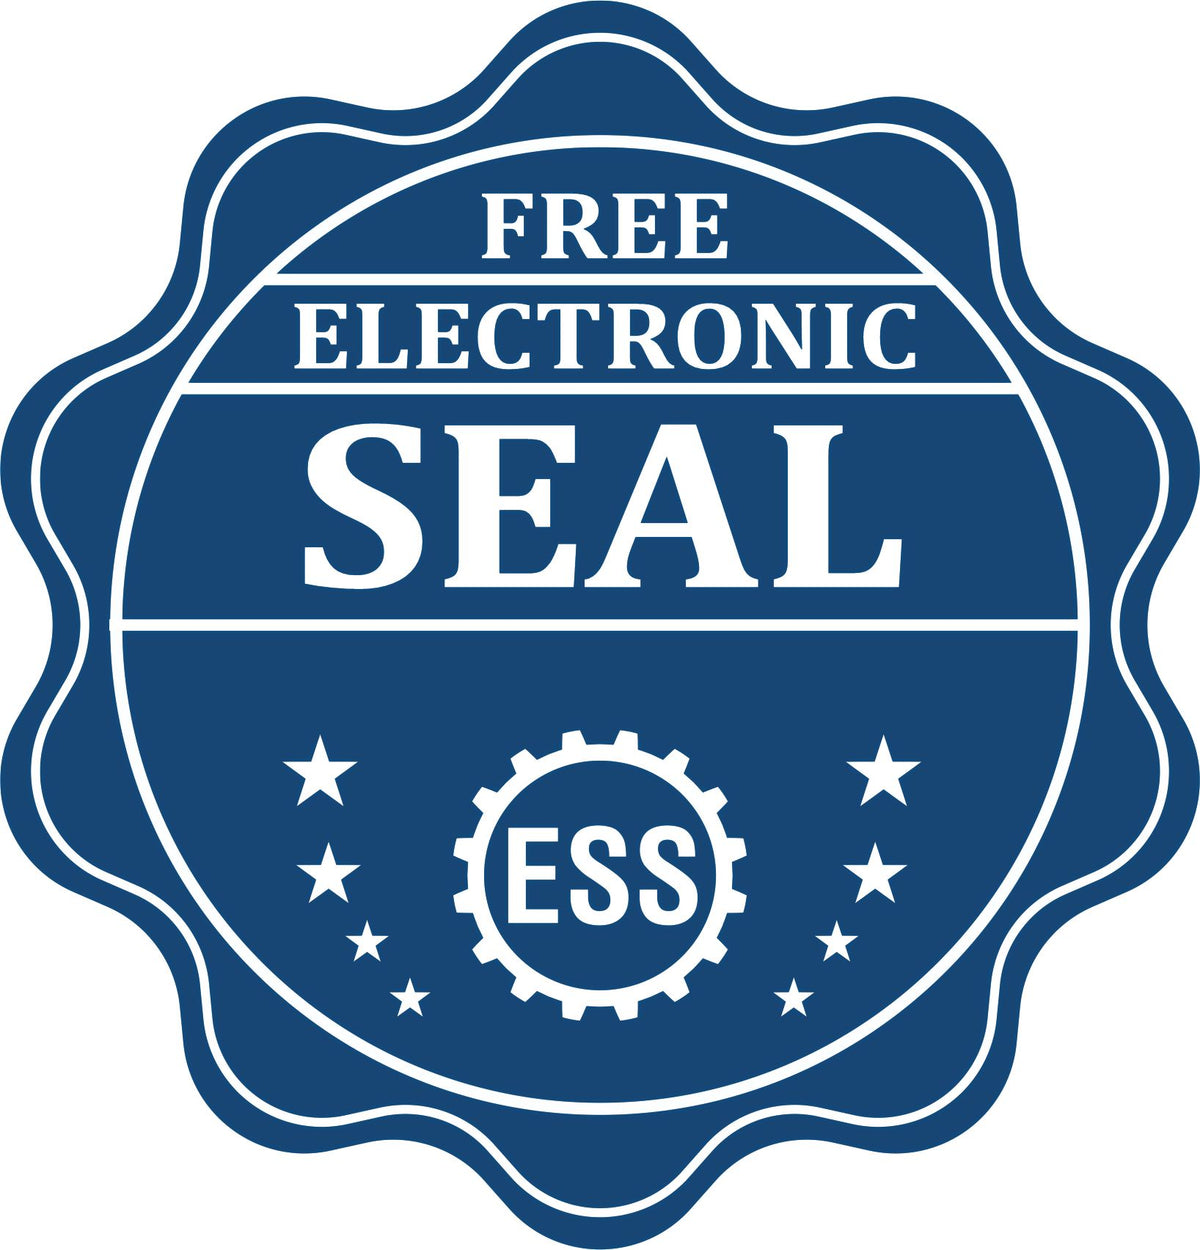 A badge showing a free electronic seal for the New Mexico Geologist Desk Seal with stars and the ESS gear on the emblem.